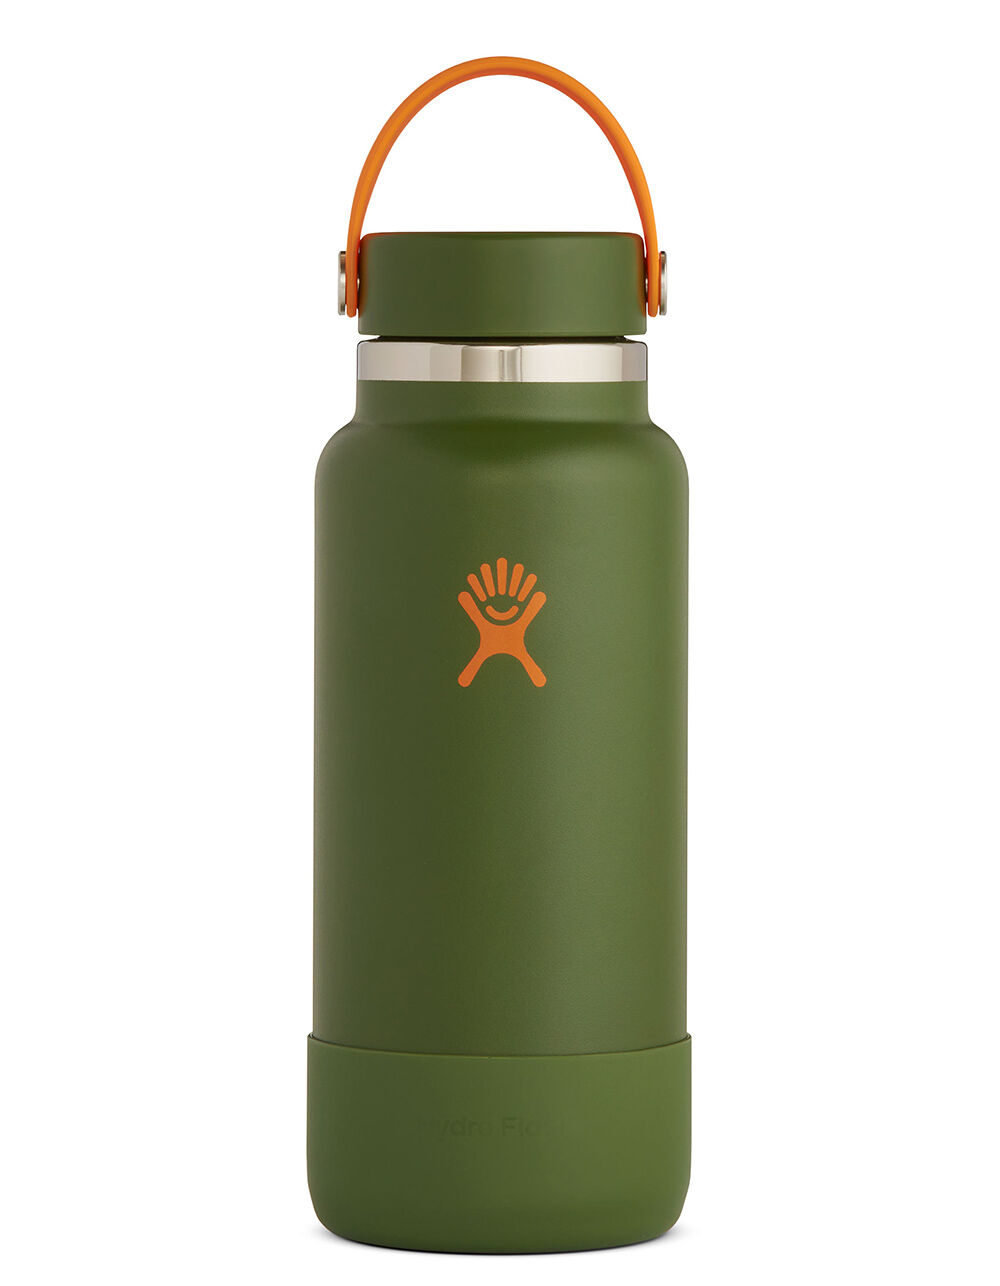 Shop Hydro Flask Kitchen & Dining by GreenTigre